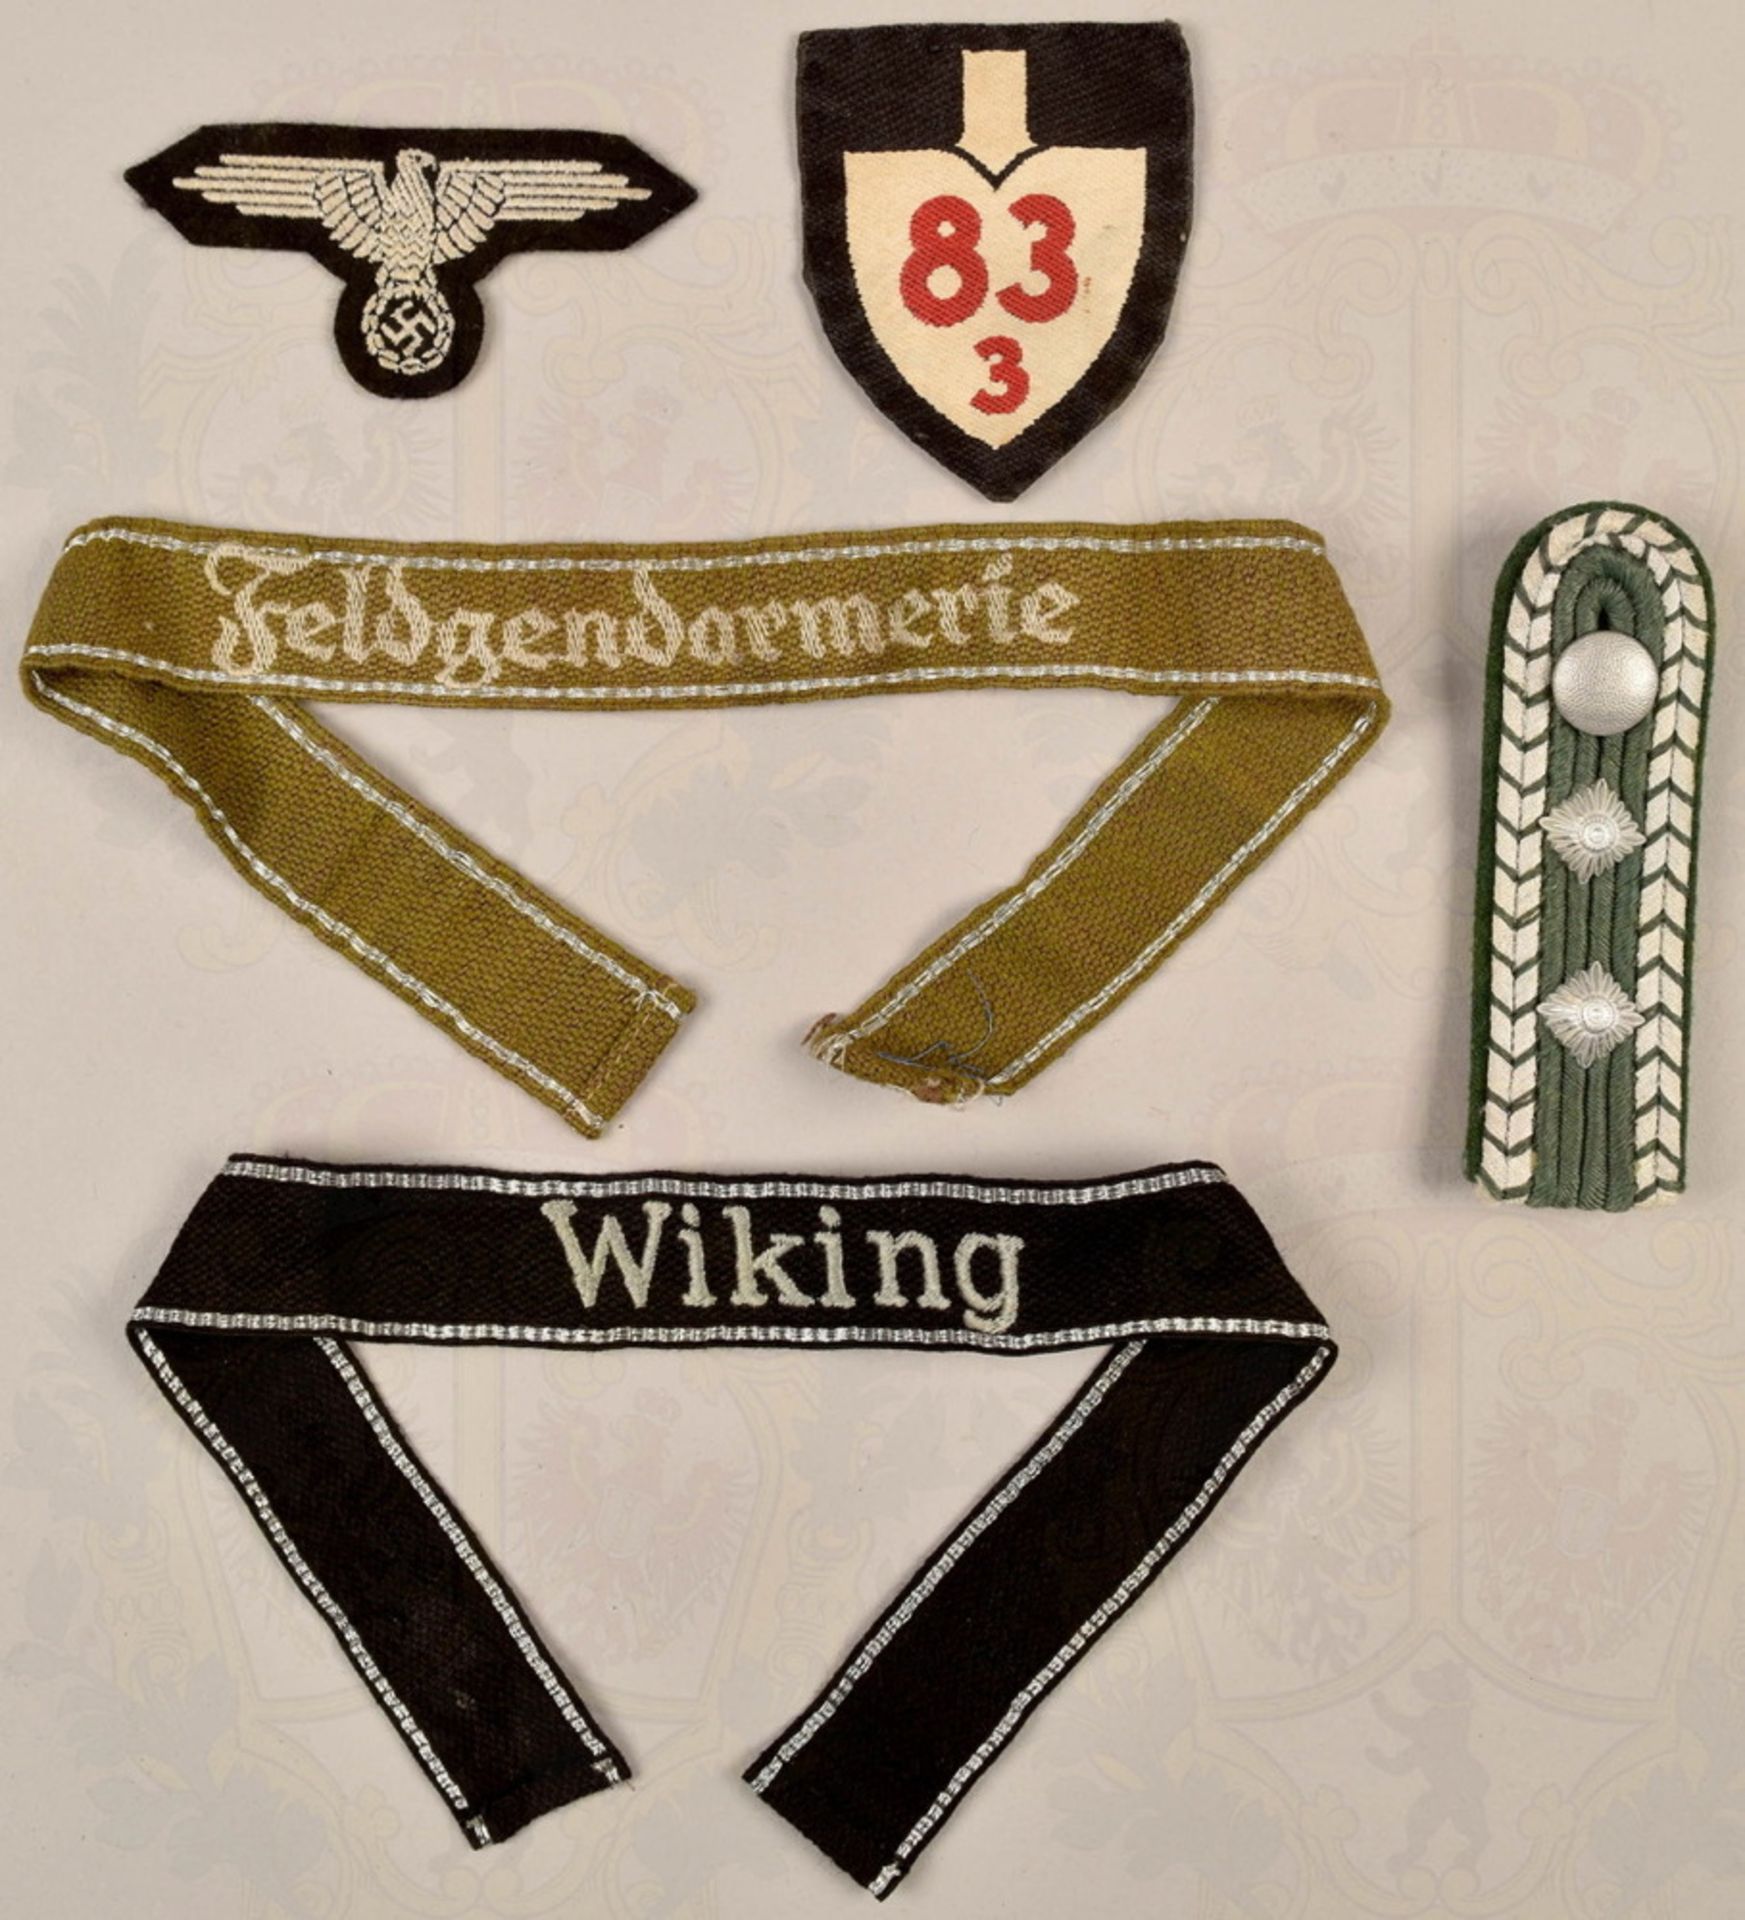 5 Wehrmacht uniform insignias incl. 2 cuff titles - Image 2 of 3